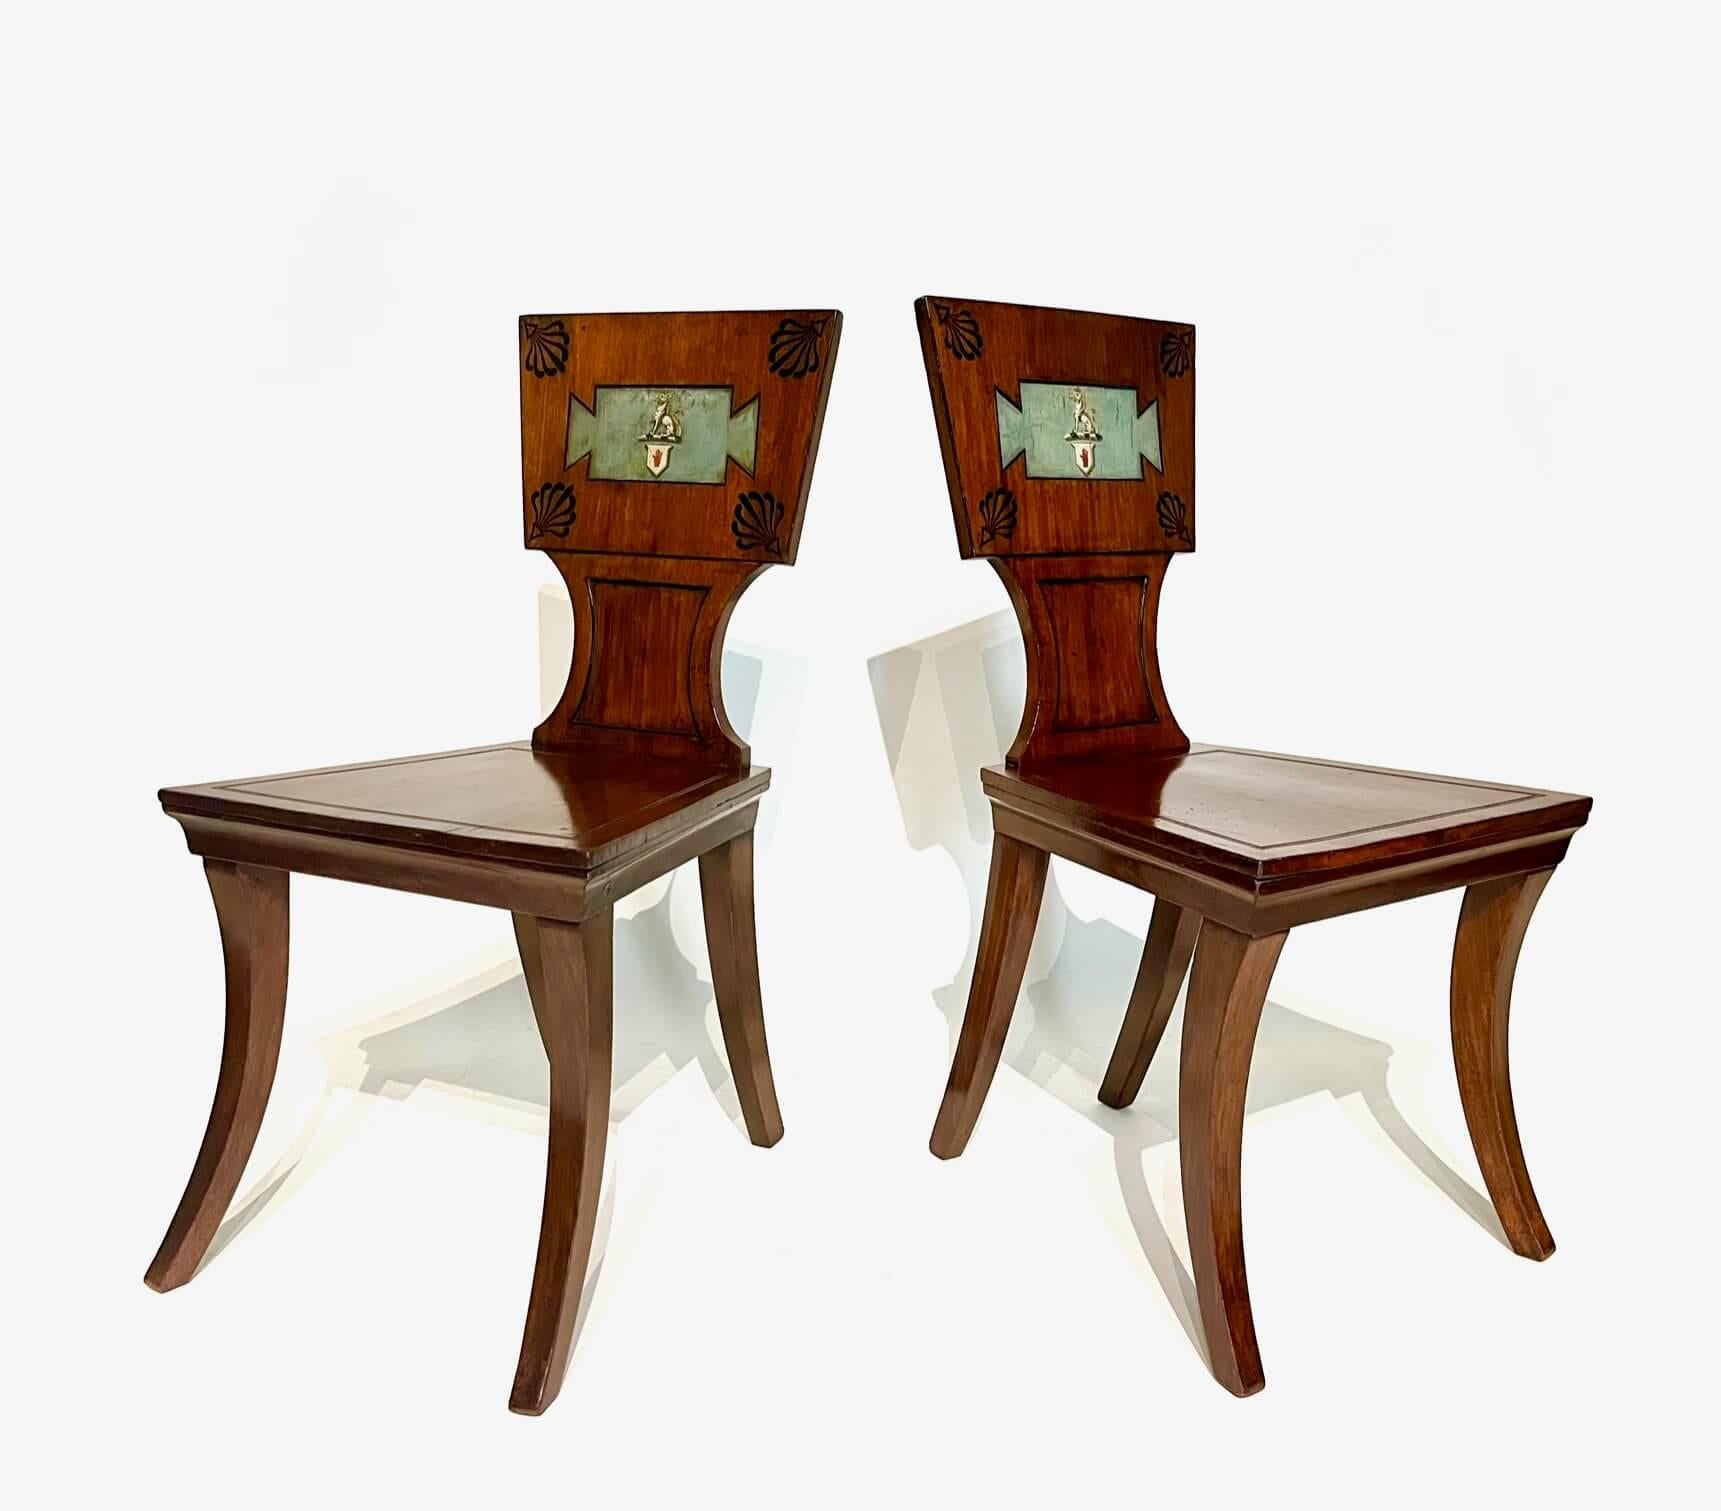 A pair of circa 1805 English Regency mahogany and ebony inlaid hall chairs or seats attributed to London cabinetmakers Marsh and Tatham, the tapered rectangular tablet backs inlaid with ebony anthemions at corners and painted 'tabula ansata' form